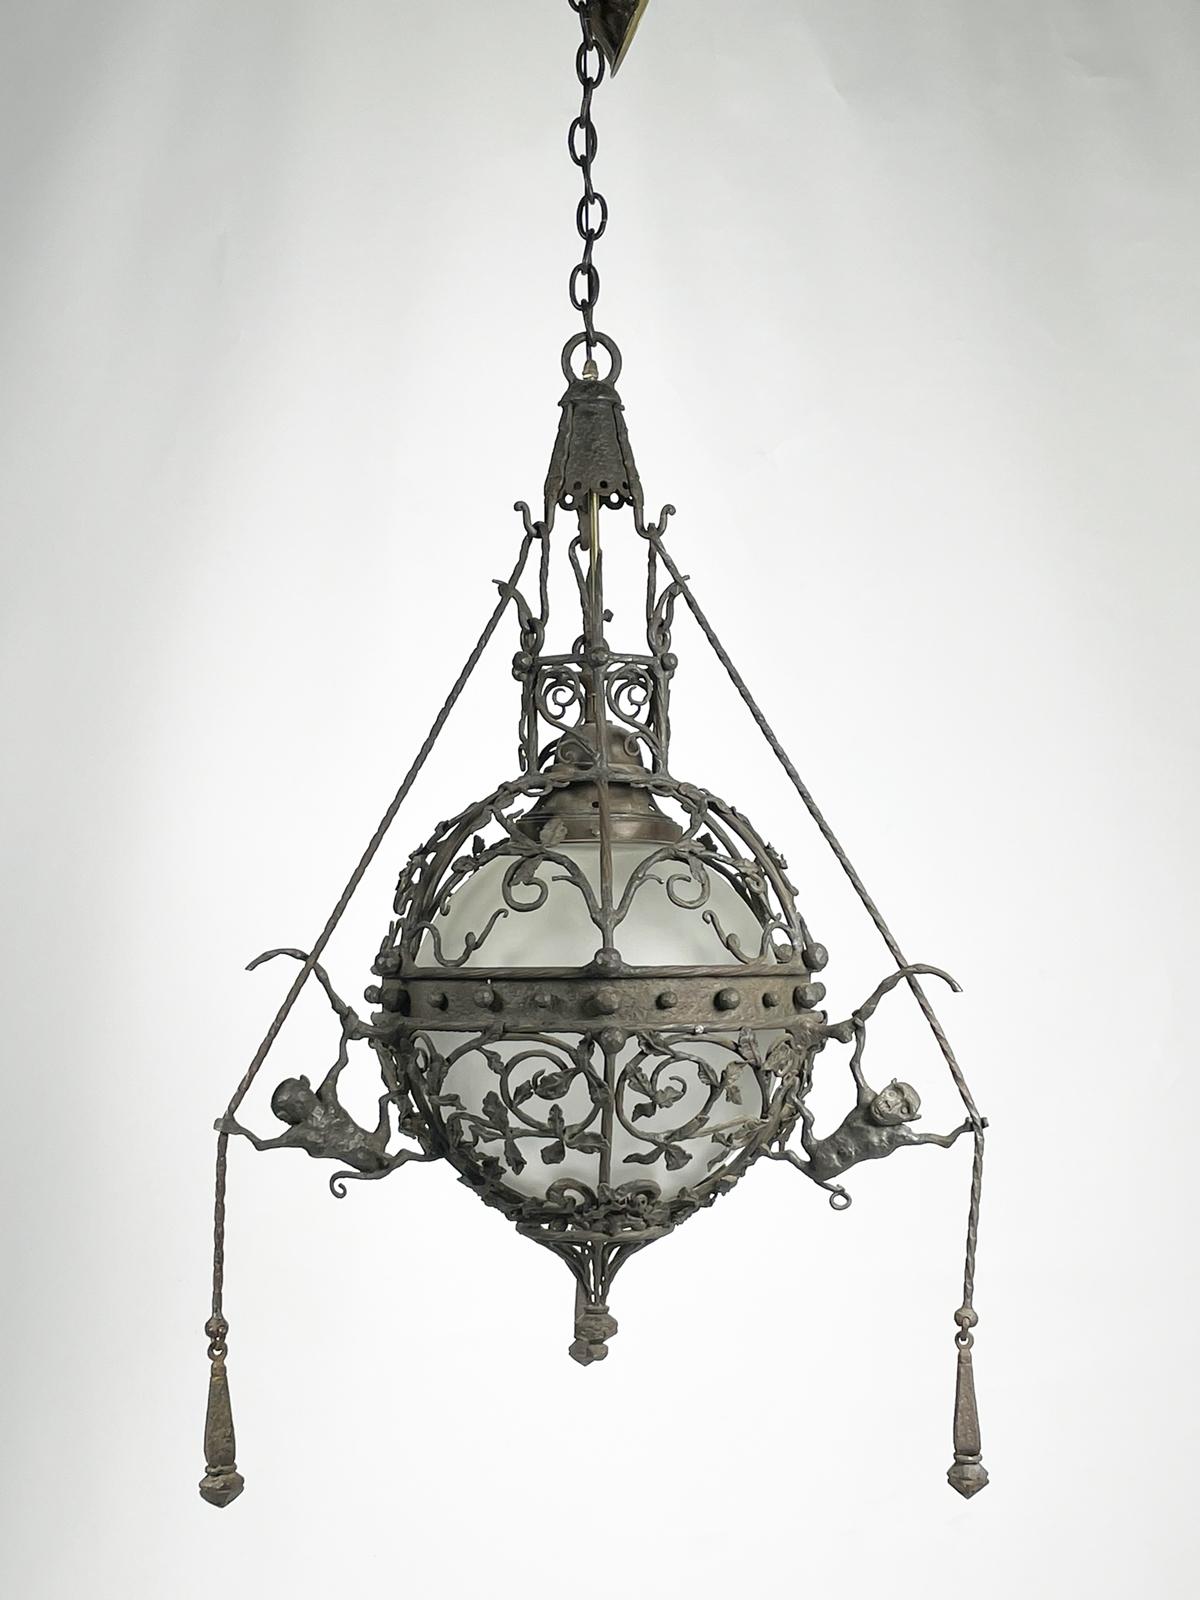 Introducing the exquisite Wrought Iron & Glass Custom Chandelier from the Sylvester Stallone Home. This stunning piece of furniture is a true testament to the beauty and elegance of wrought iron and glass, and is sure to add a touch of glamour to